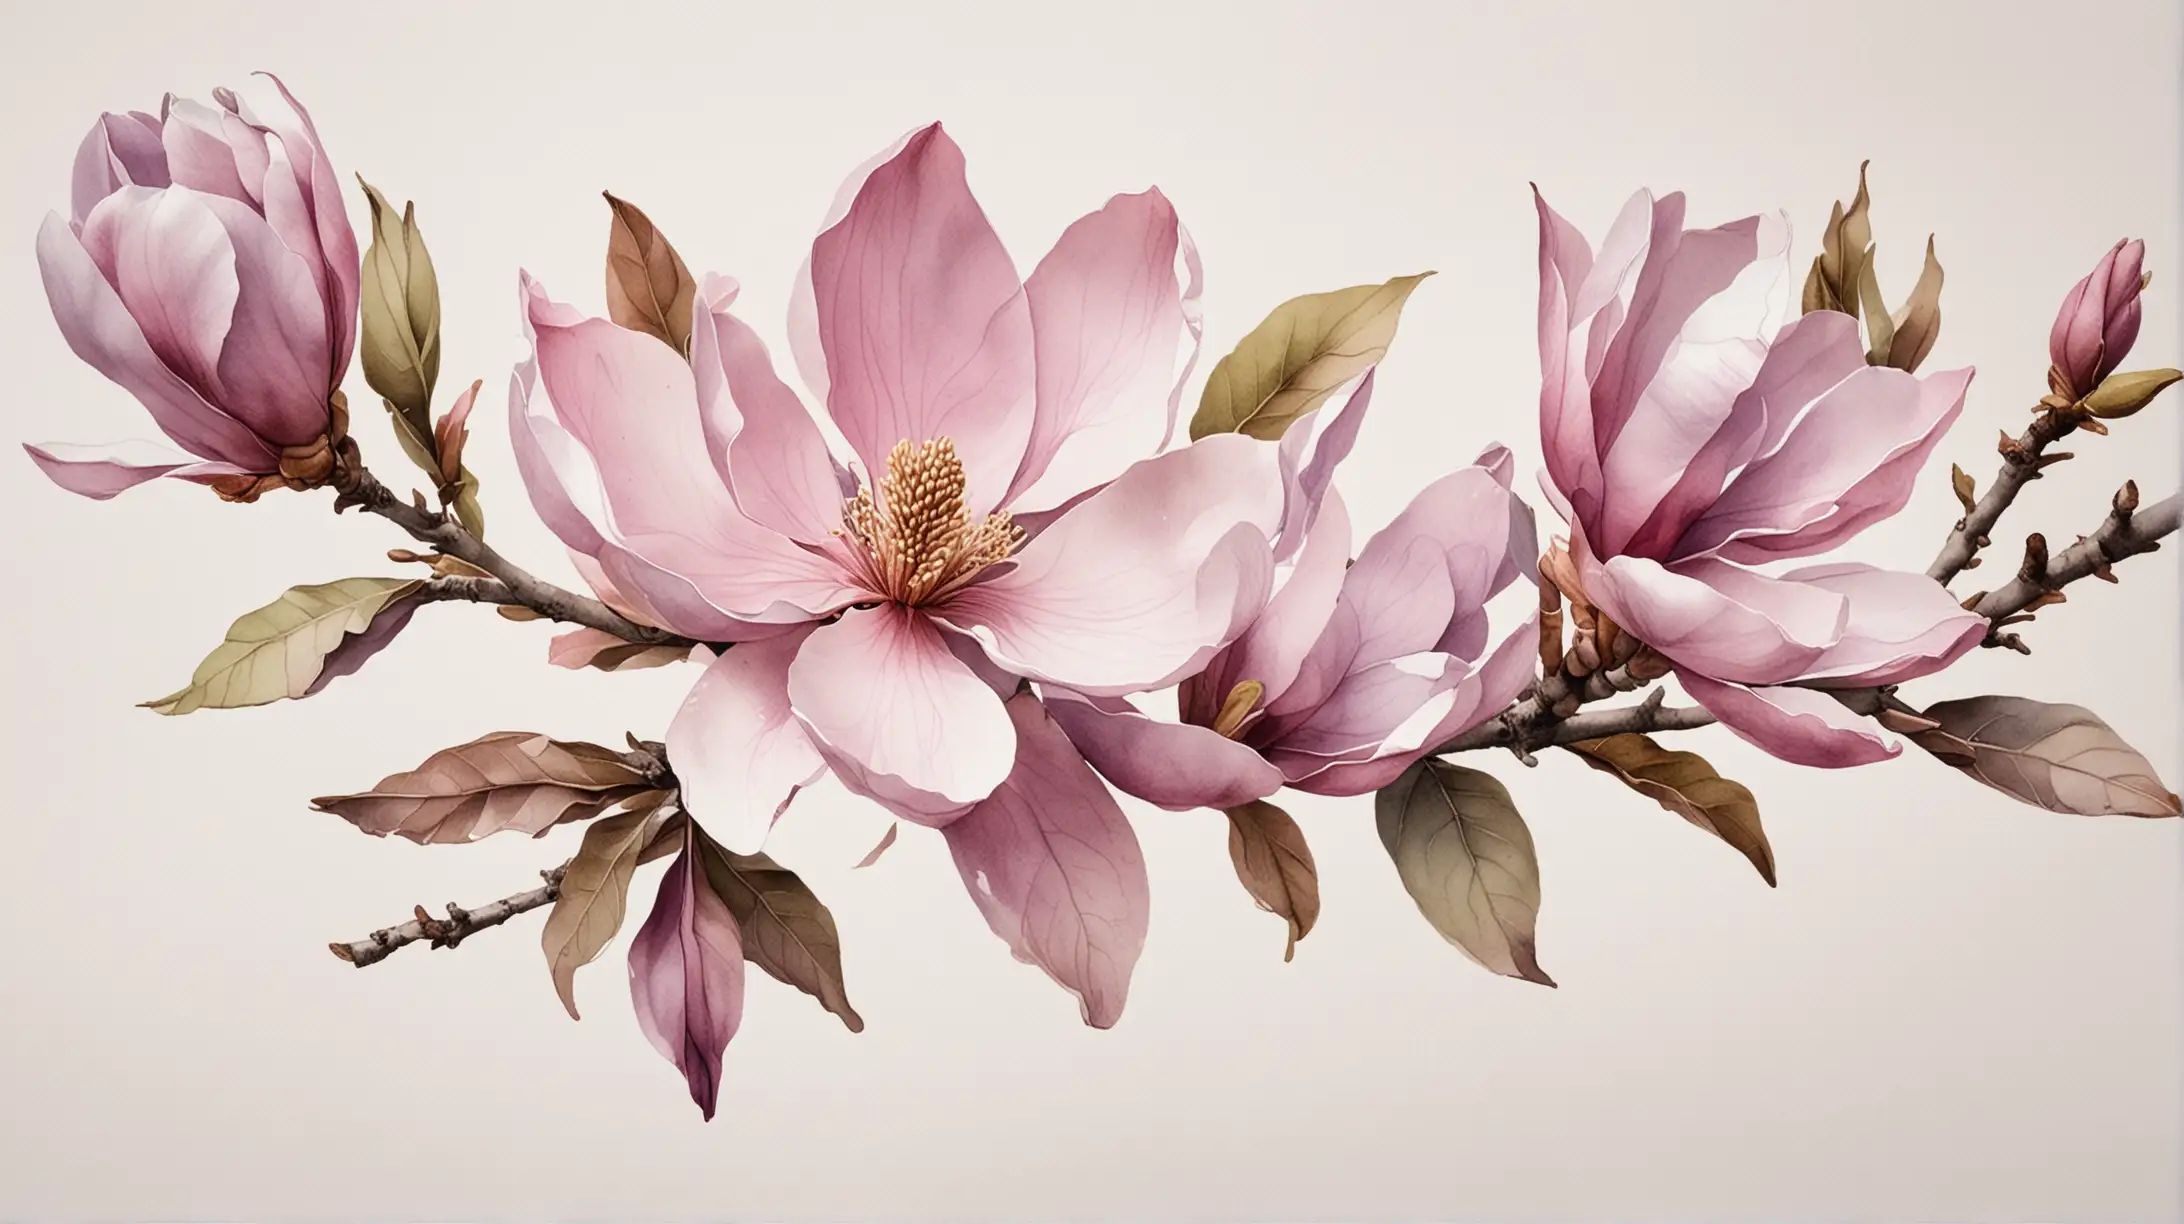 watercolou painting, branch with mauve coloured magnolia flowers, isolated on a solid white background